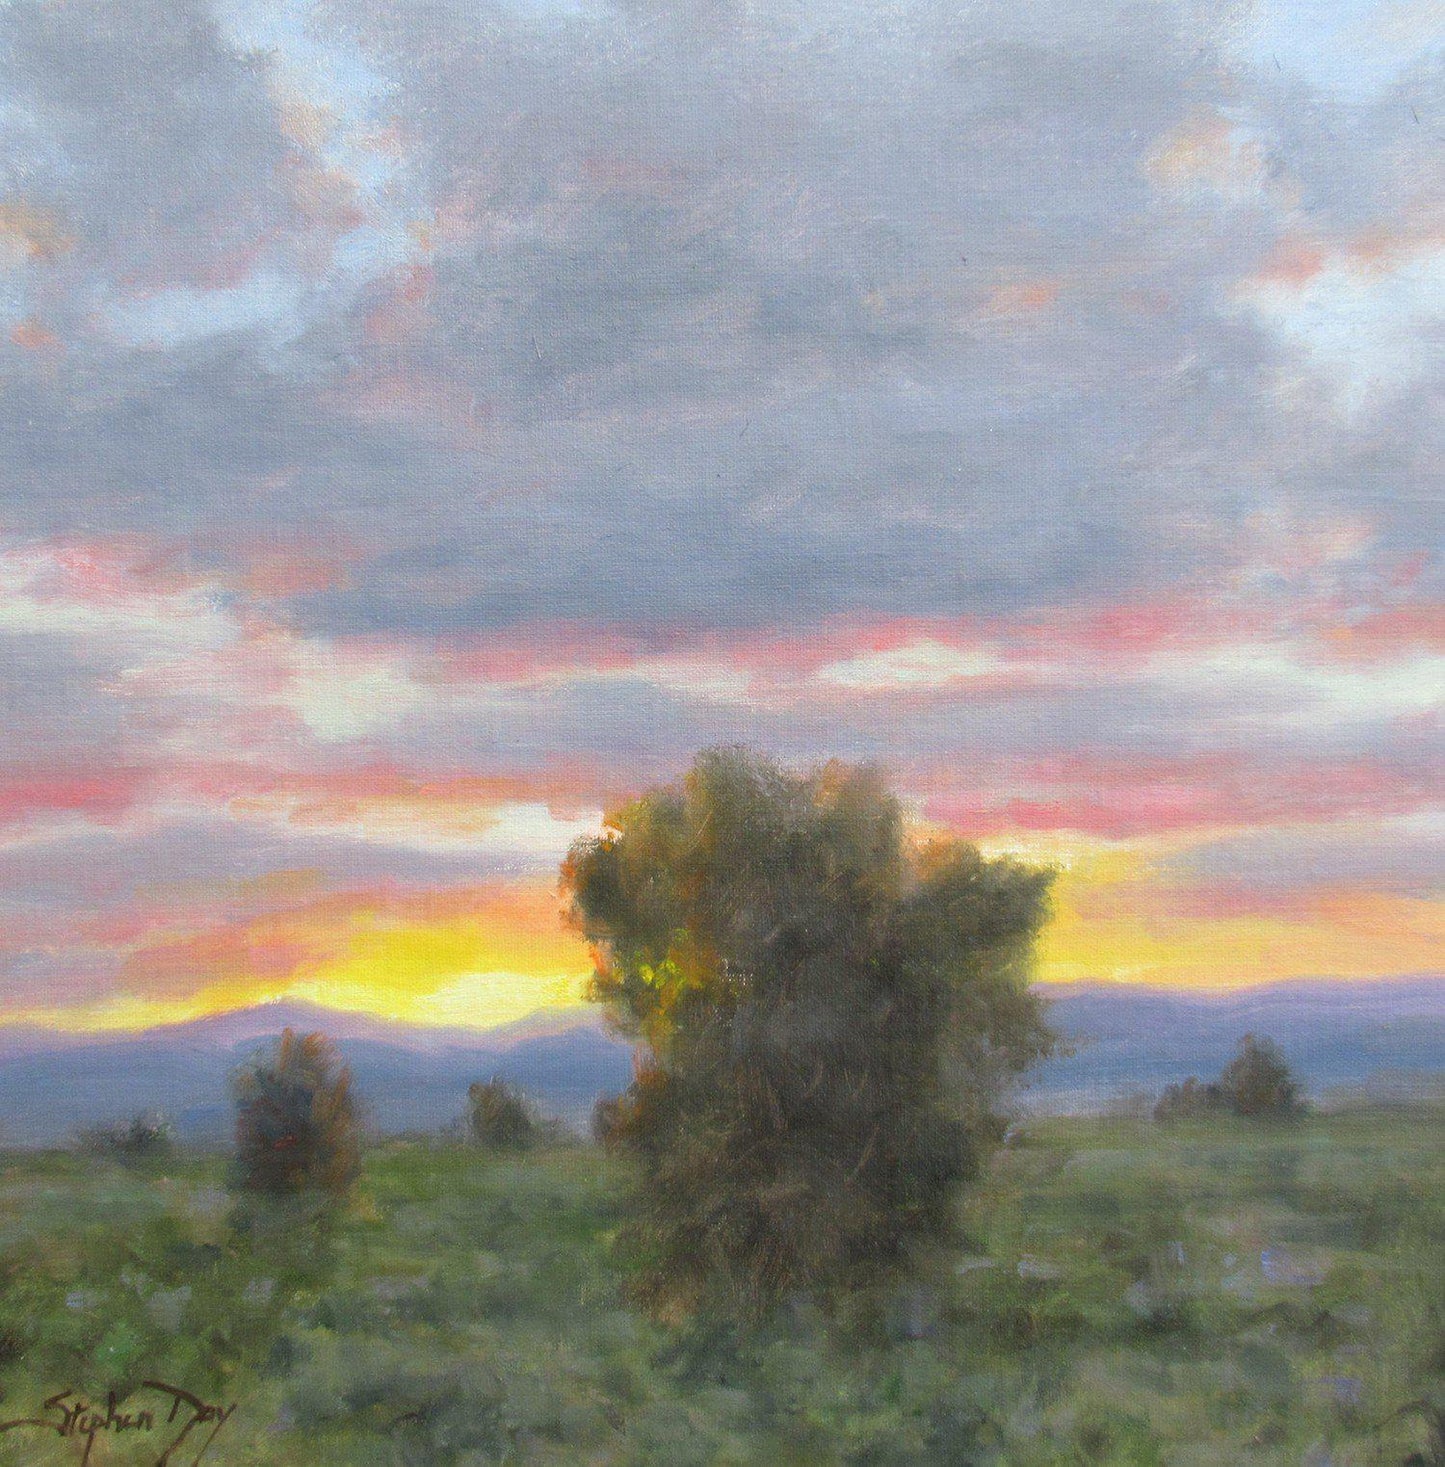 Valley Sunset-Painting-Stephen Day-Sorrel Sky Gallery